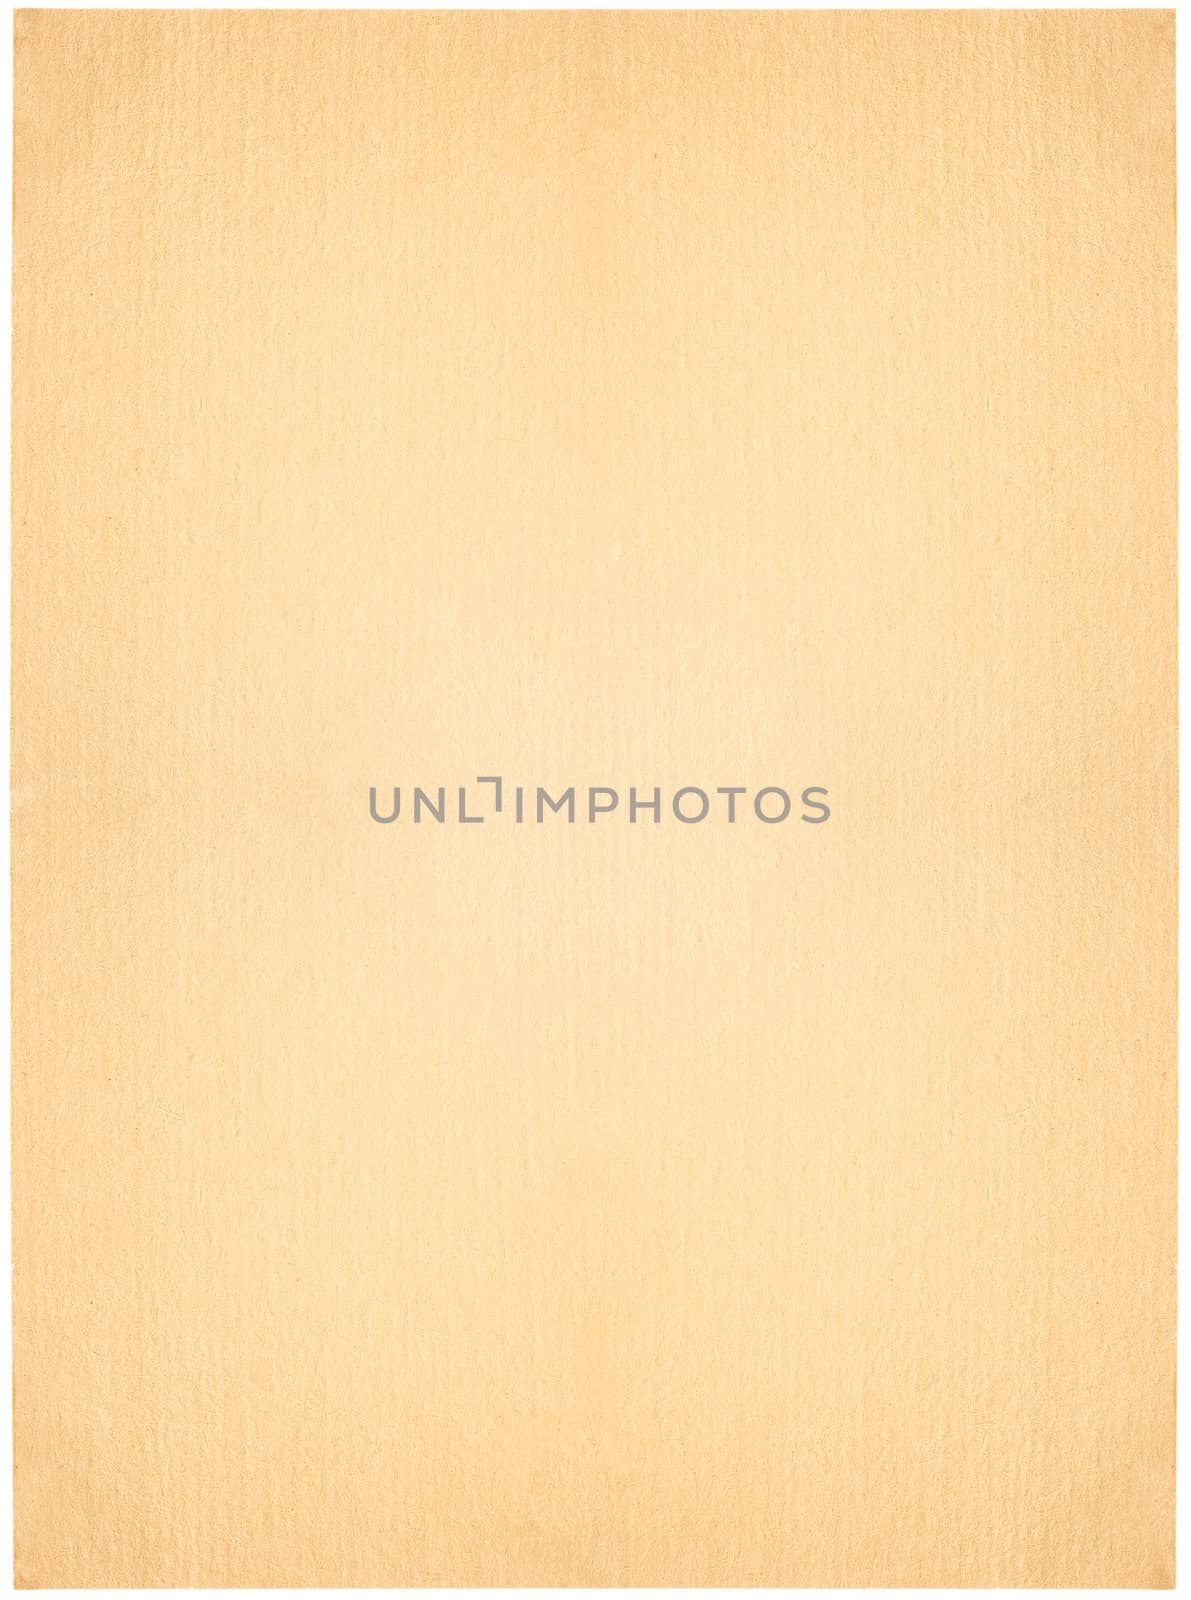 Background of vintage paper texture background